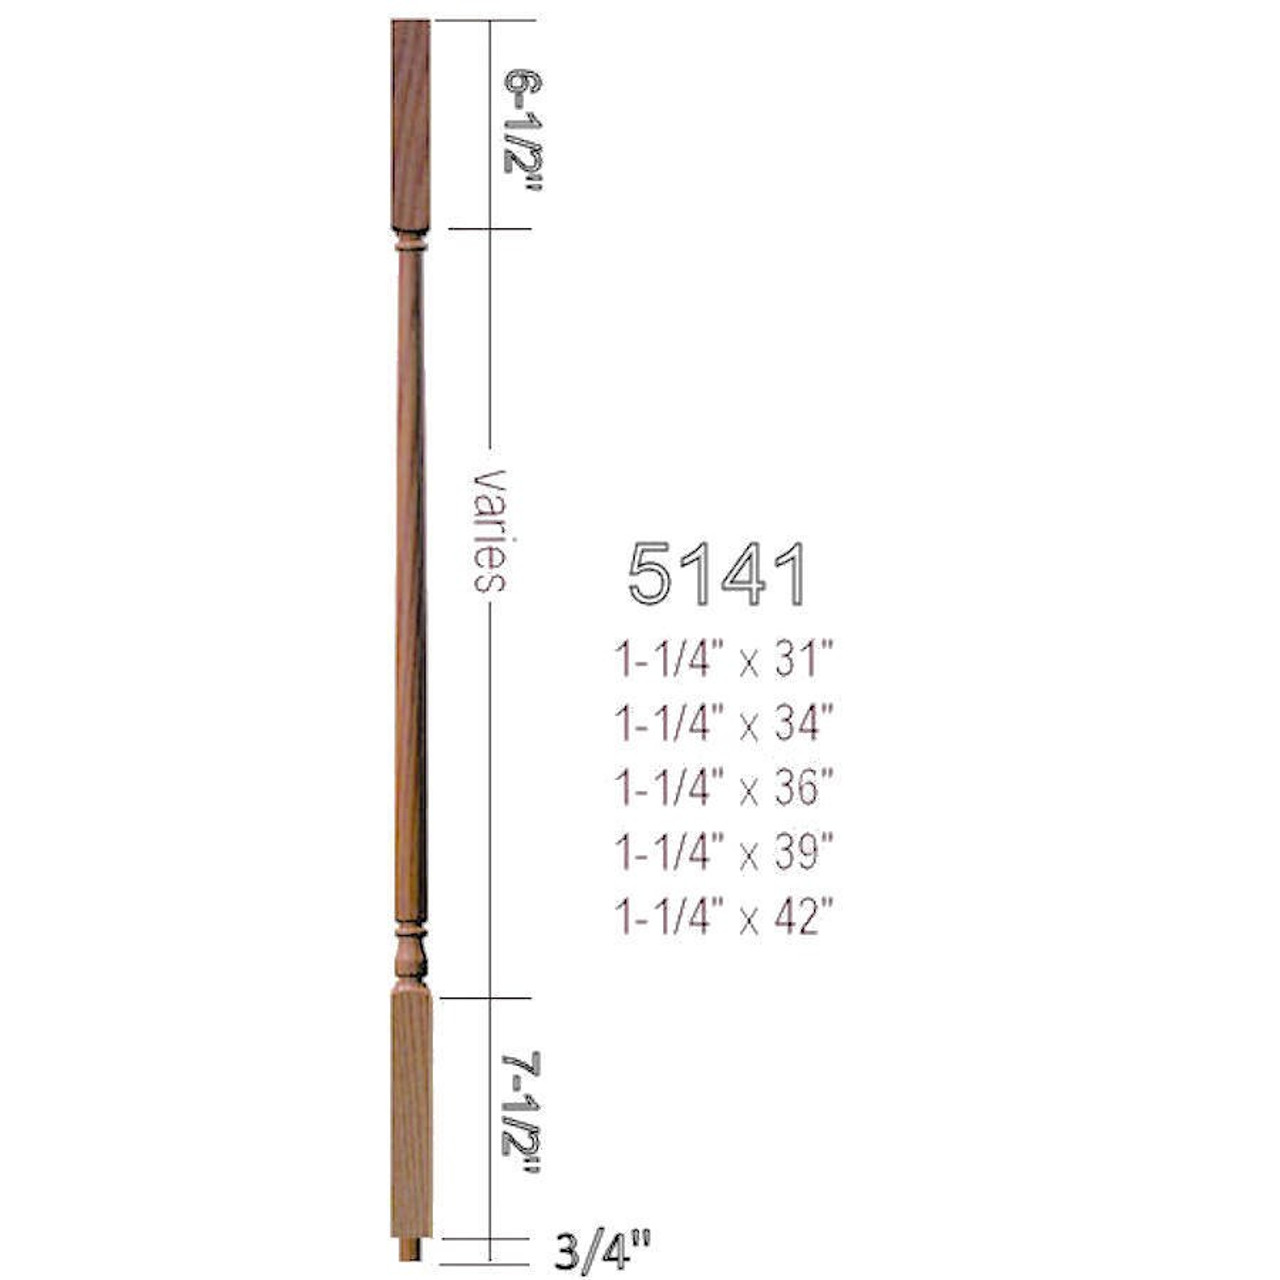 5141 42" Square Top Colonial Baluster, Dimensional Information